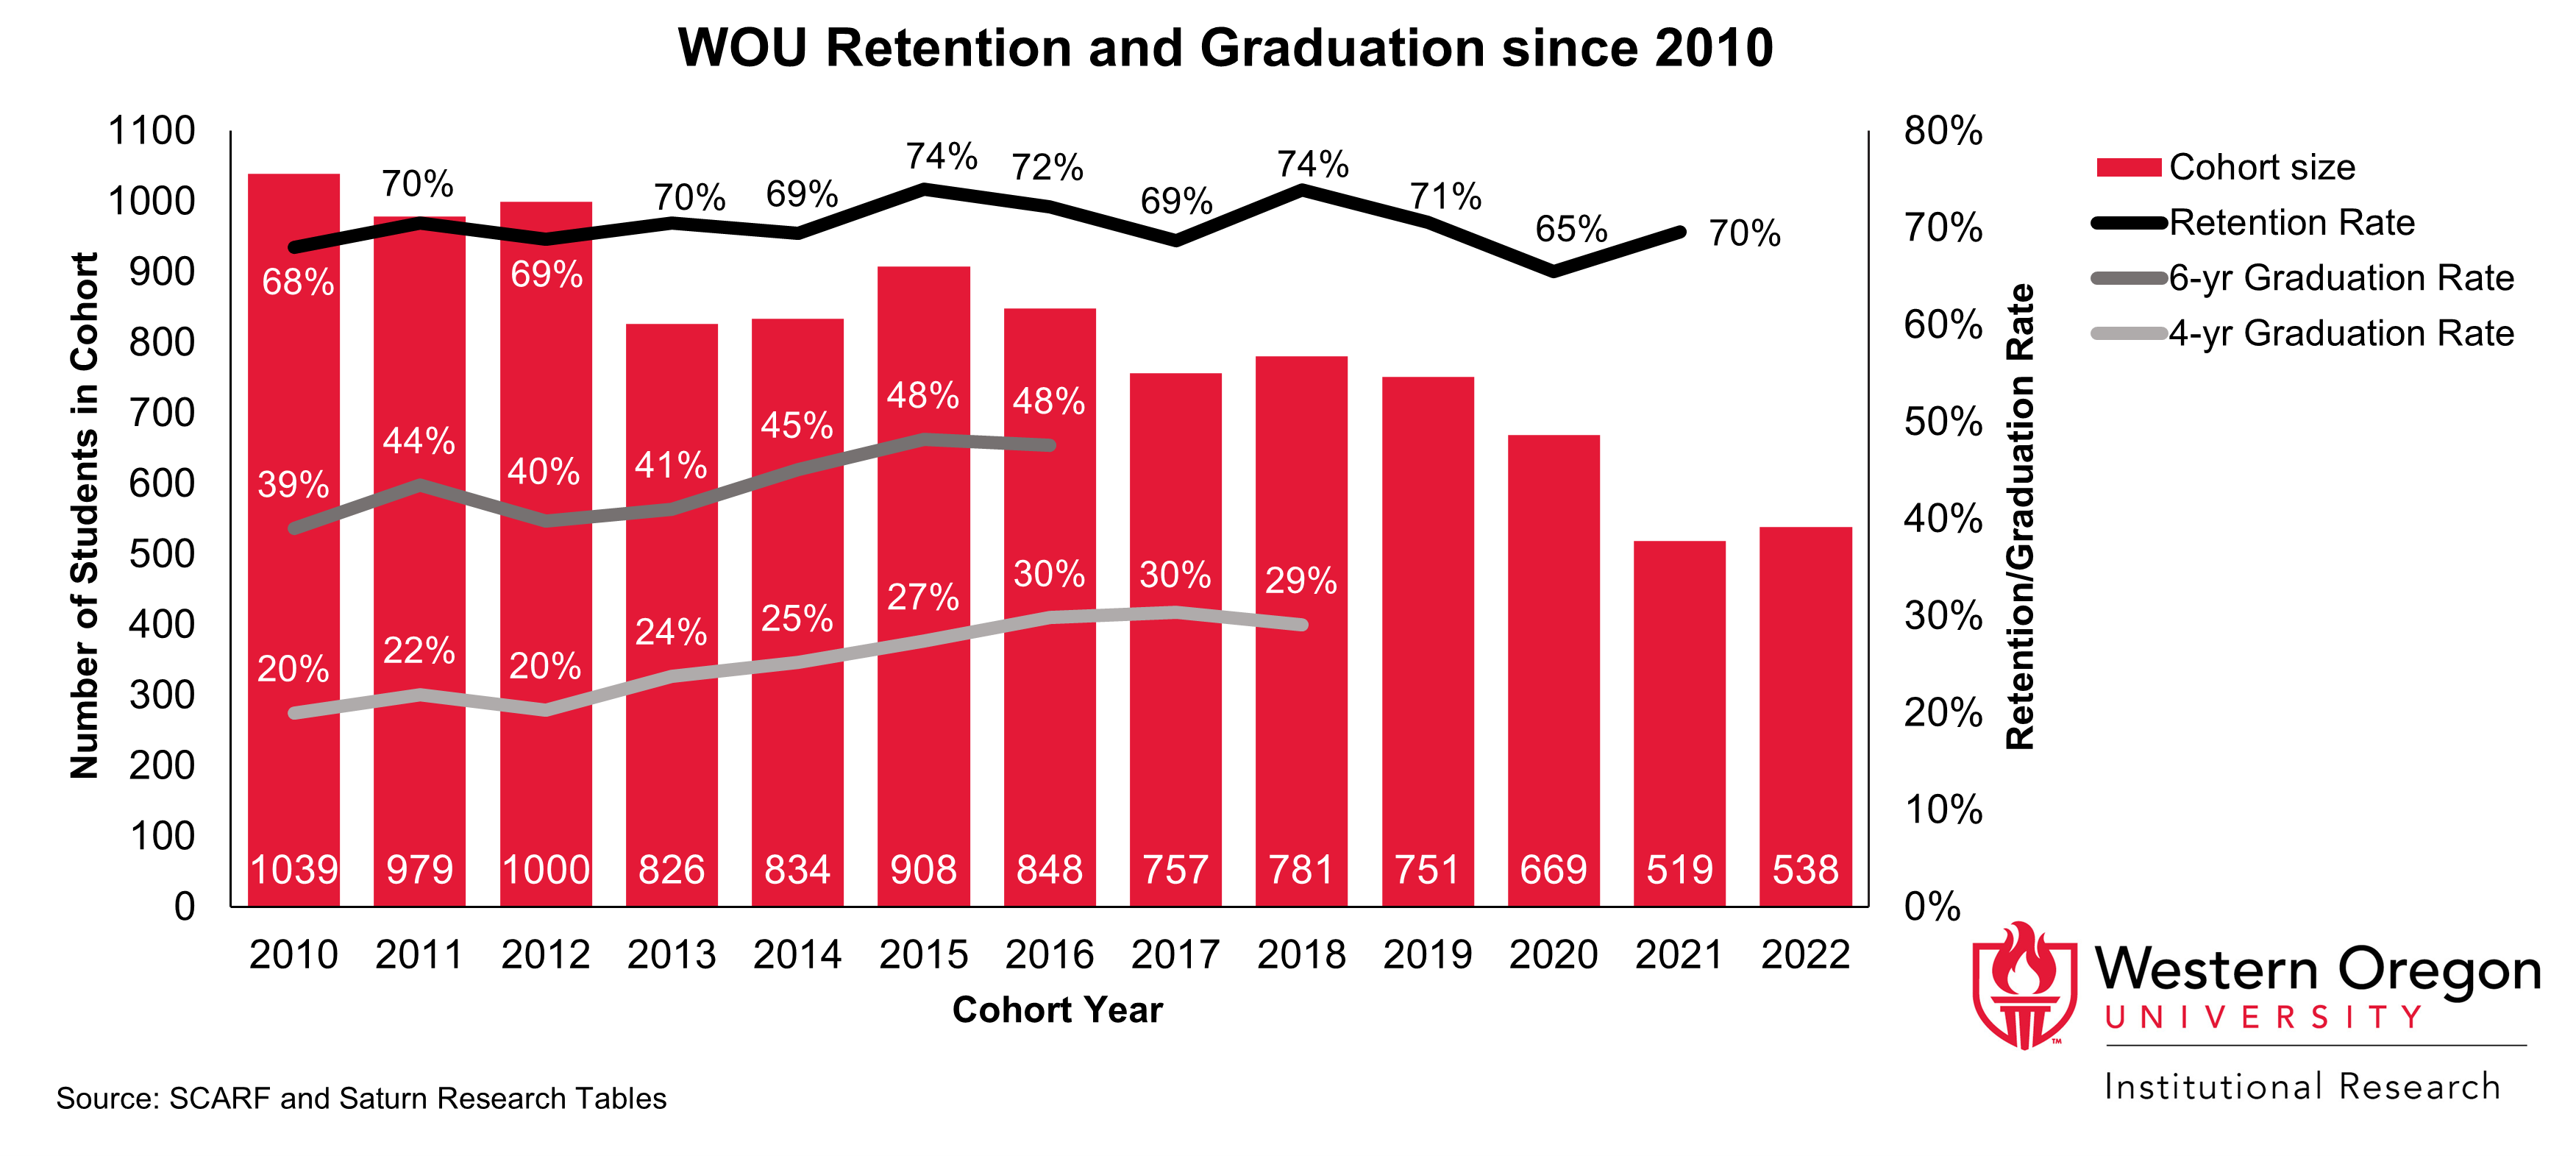 Bar and line graph of retention and 4- and 6-year graduation rates since 2010 for WOU students, showing that graduation rates have been steadily increasing while retention rates have remained largely stable